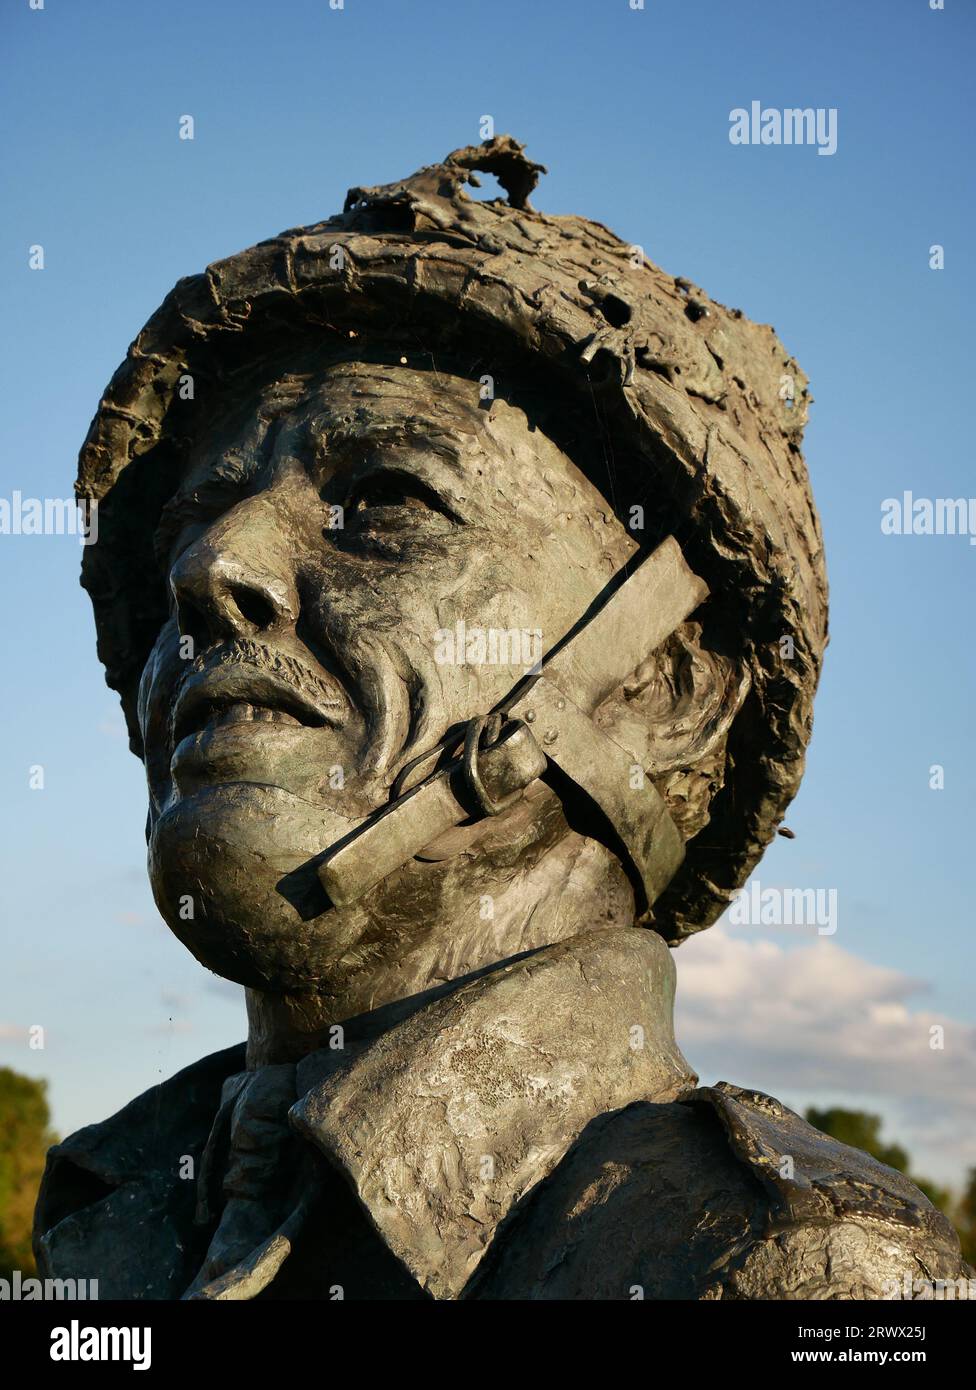 Memorial statue of Major Howard who led the glider assault on Benouville Pegasus Bridge at the start of the D-Day  Allied invasion of Normandy. Stock Photo